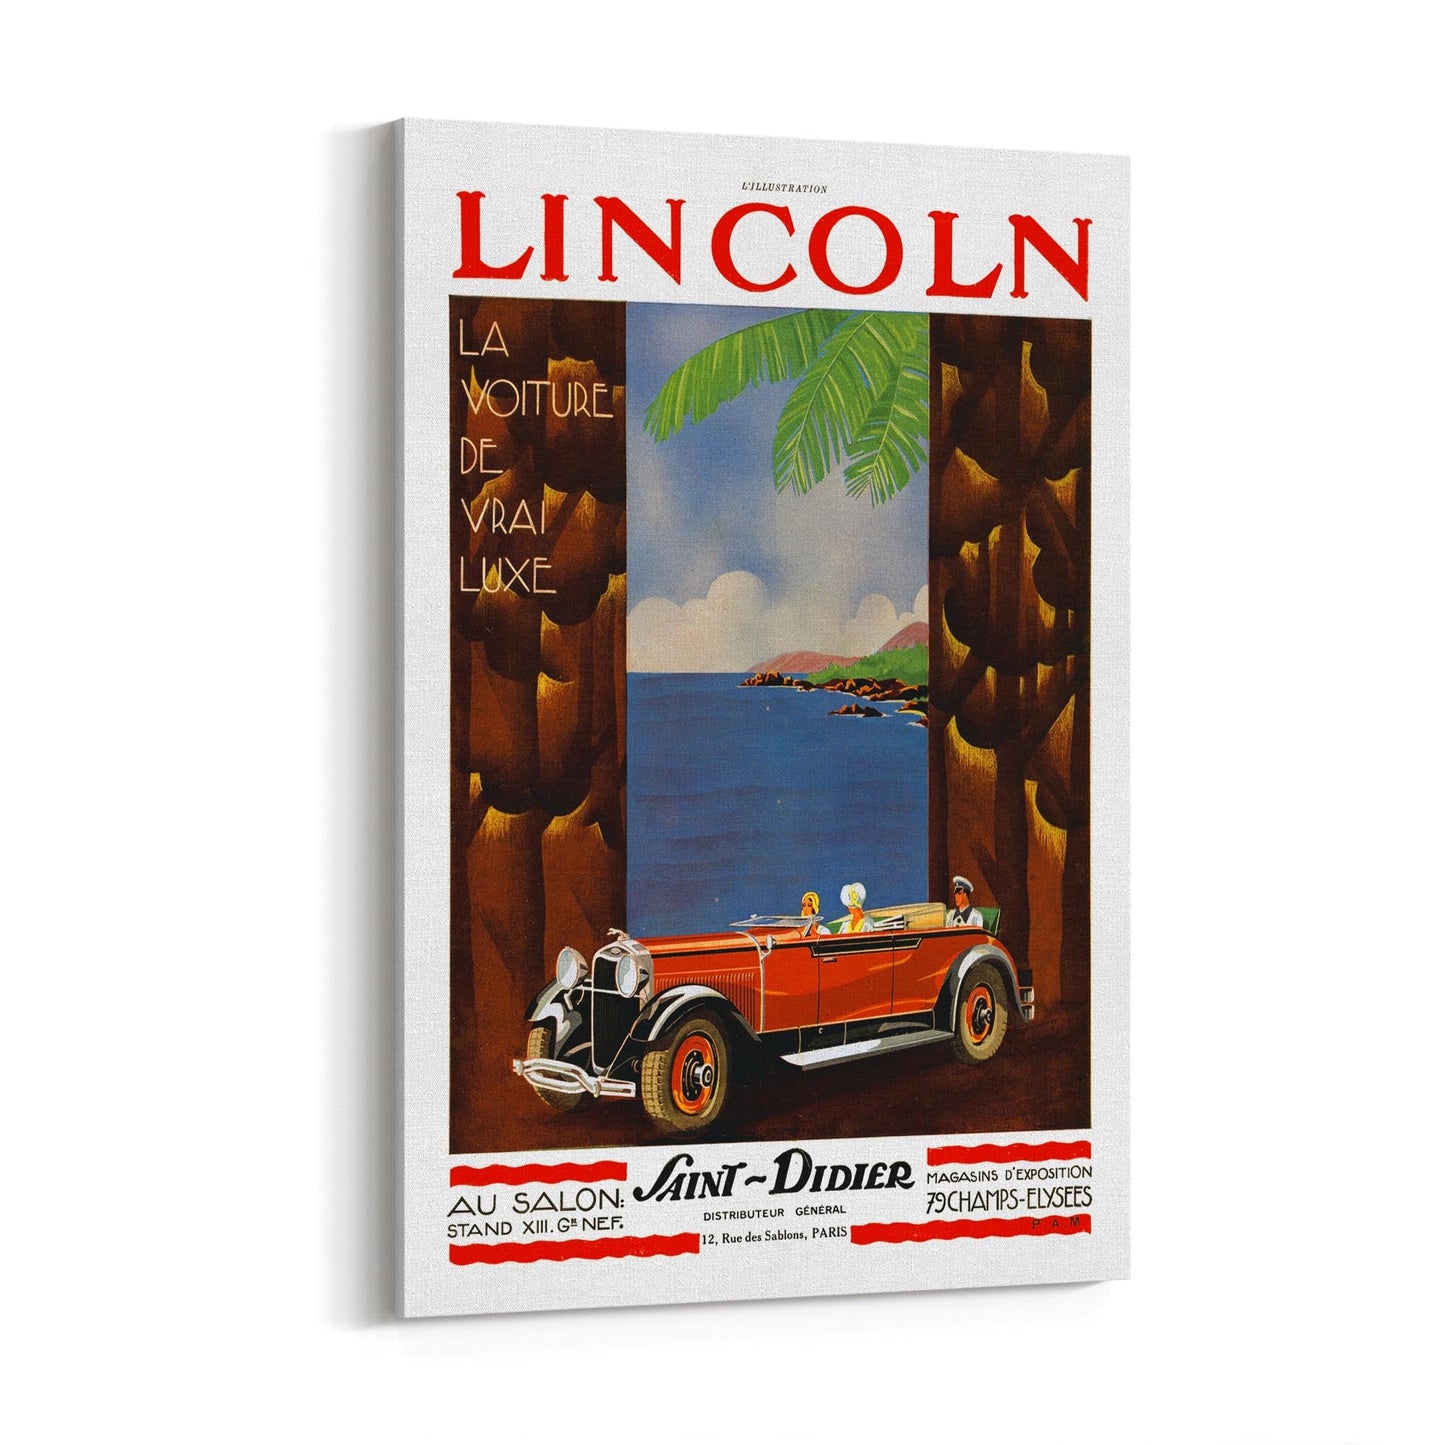 "Lincoln Saint Didier" French Car | Framed Canvas Vintage Advertisement